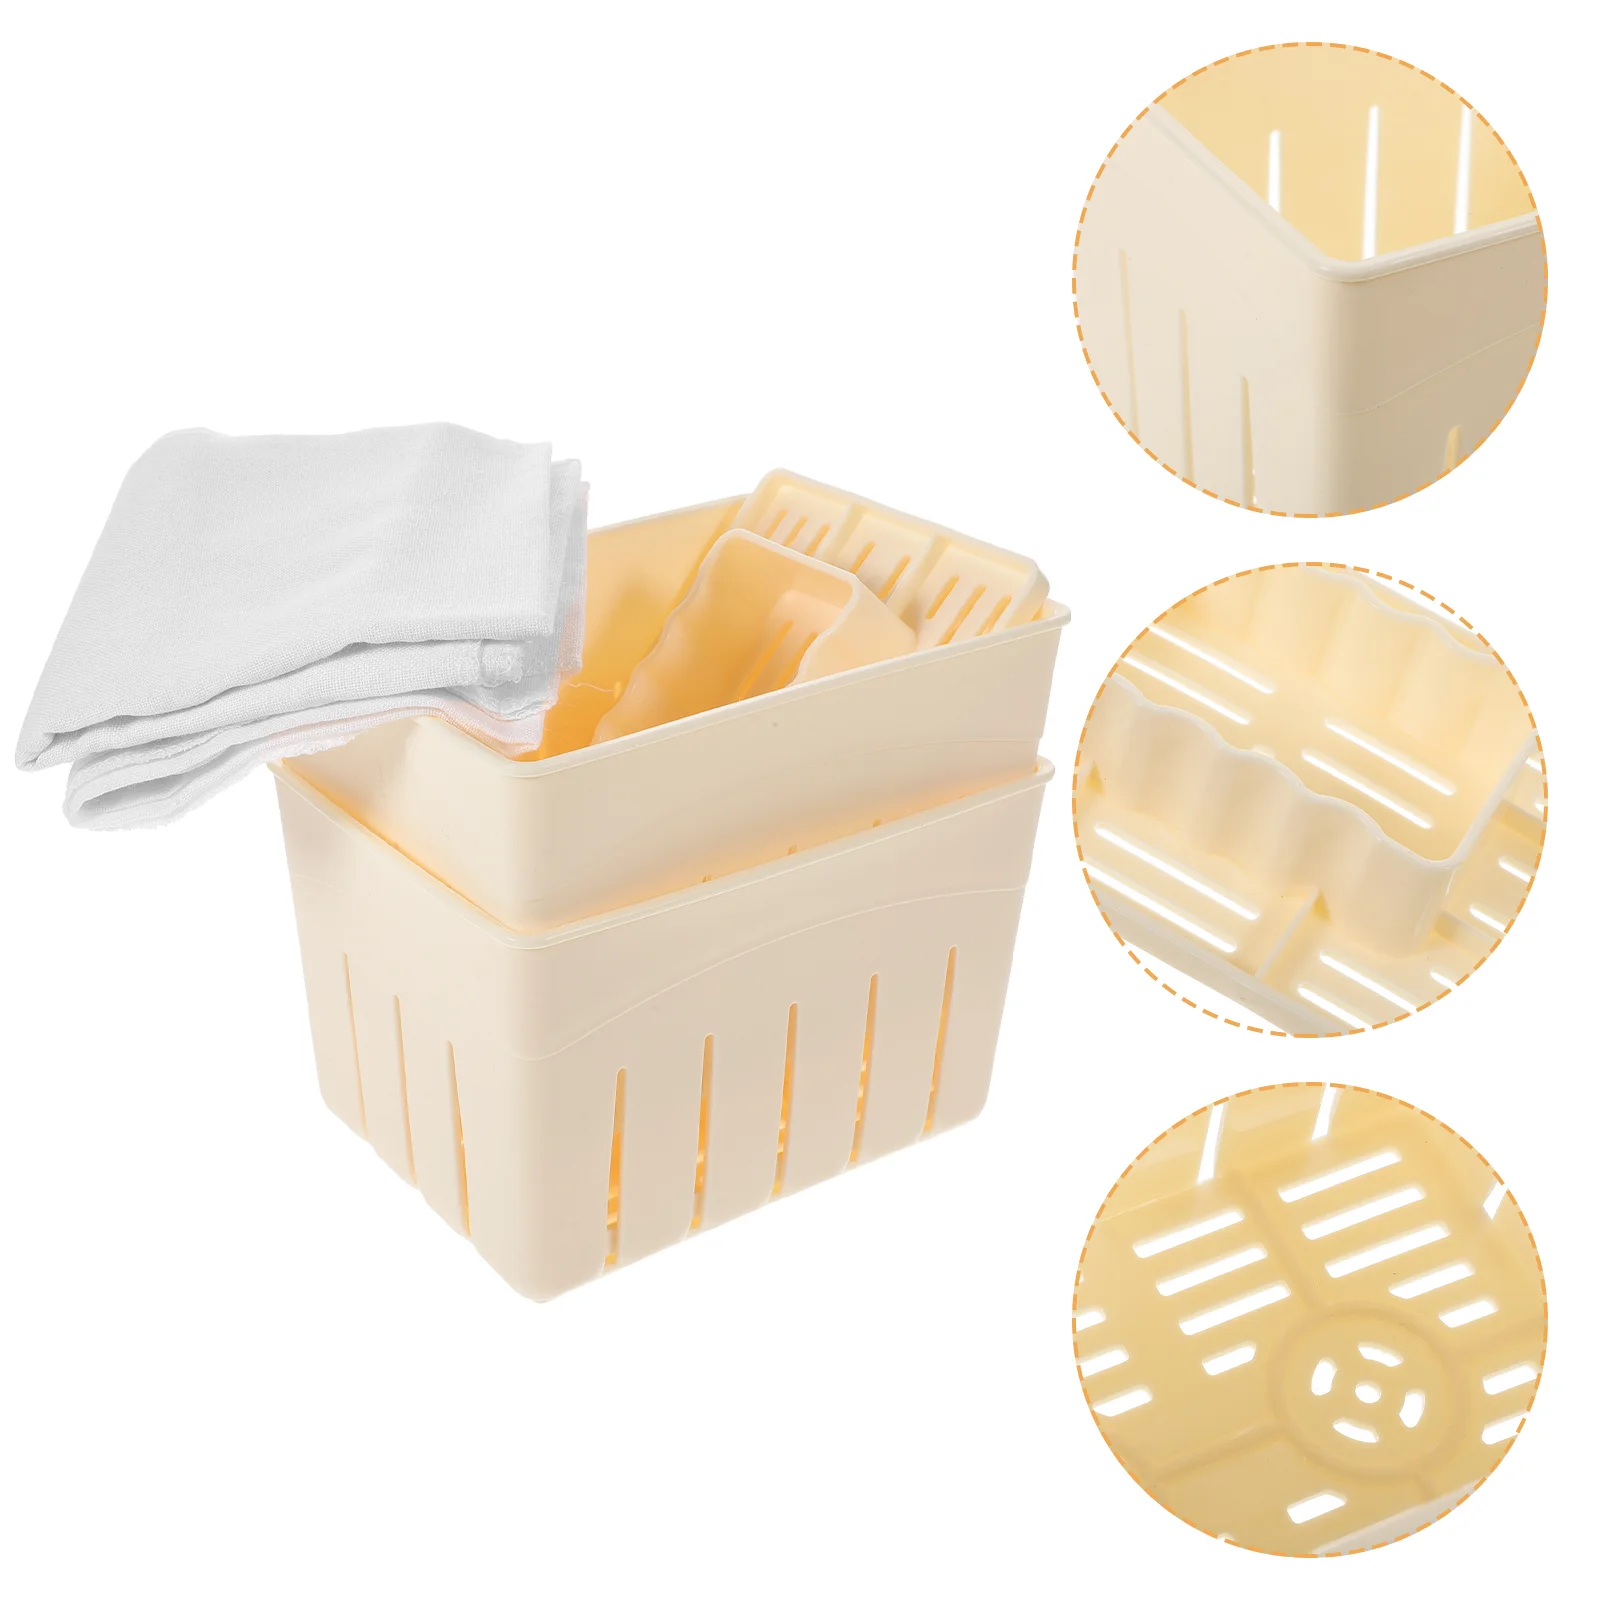 

2 Sets Homemade Tofu Stamper Plastic Mold Bun Making Molds Pressing Tool Pp Sturdy Squeegee Easy cheese